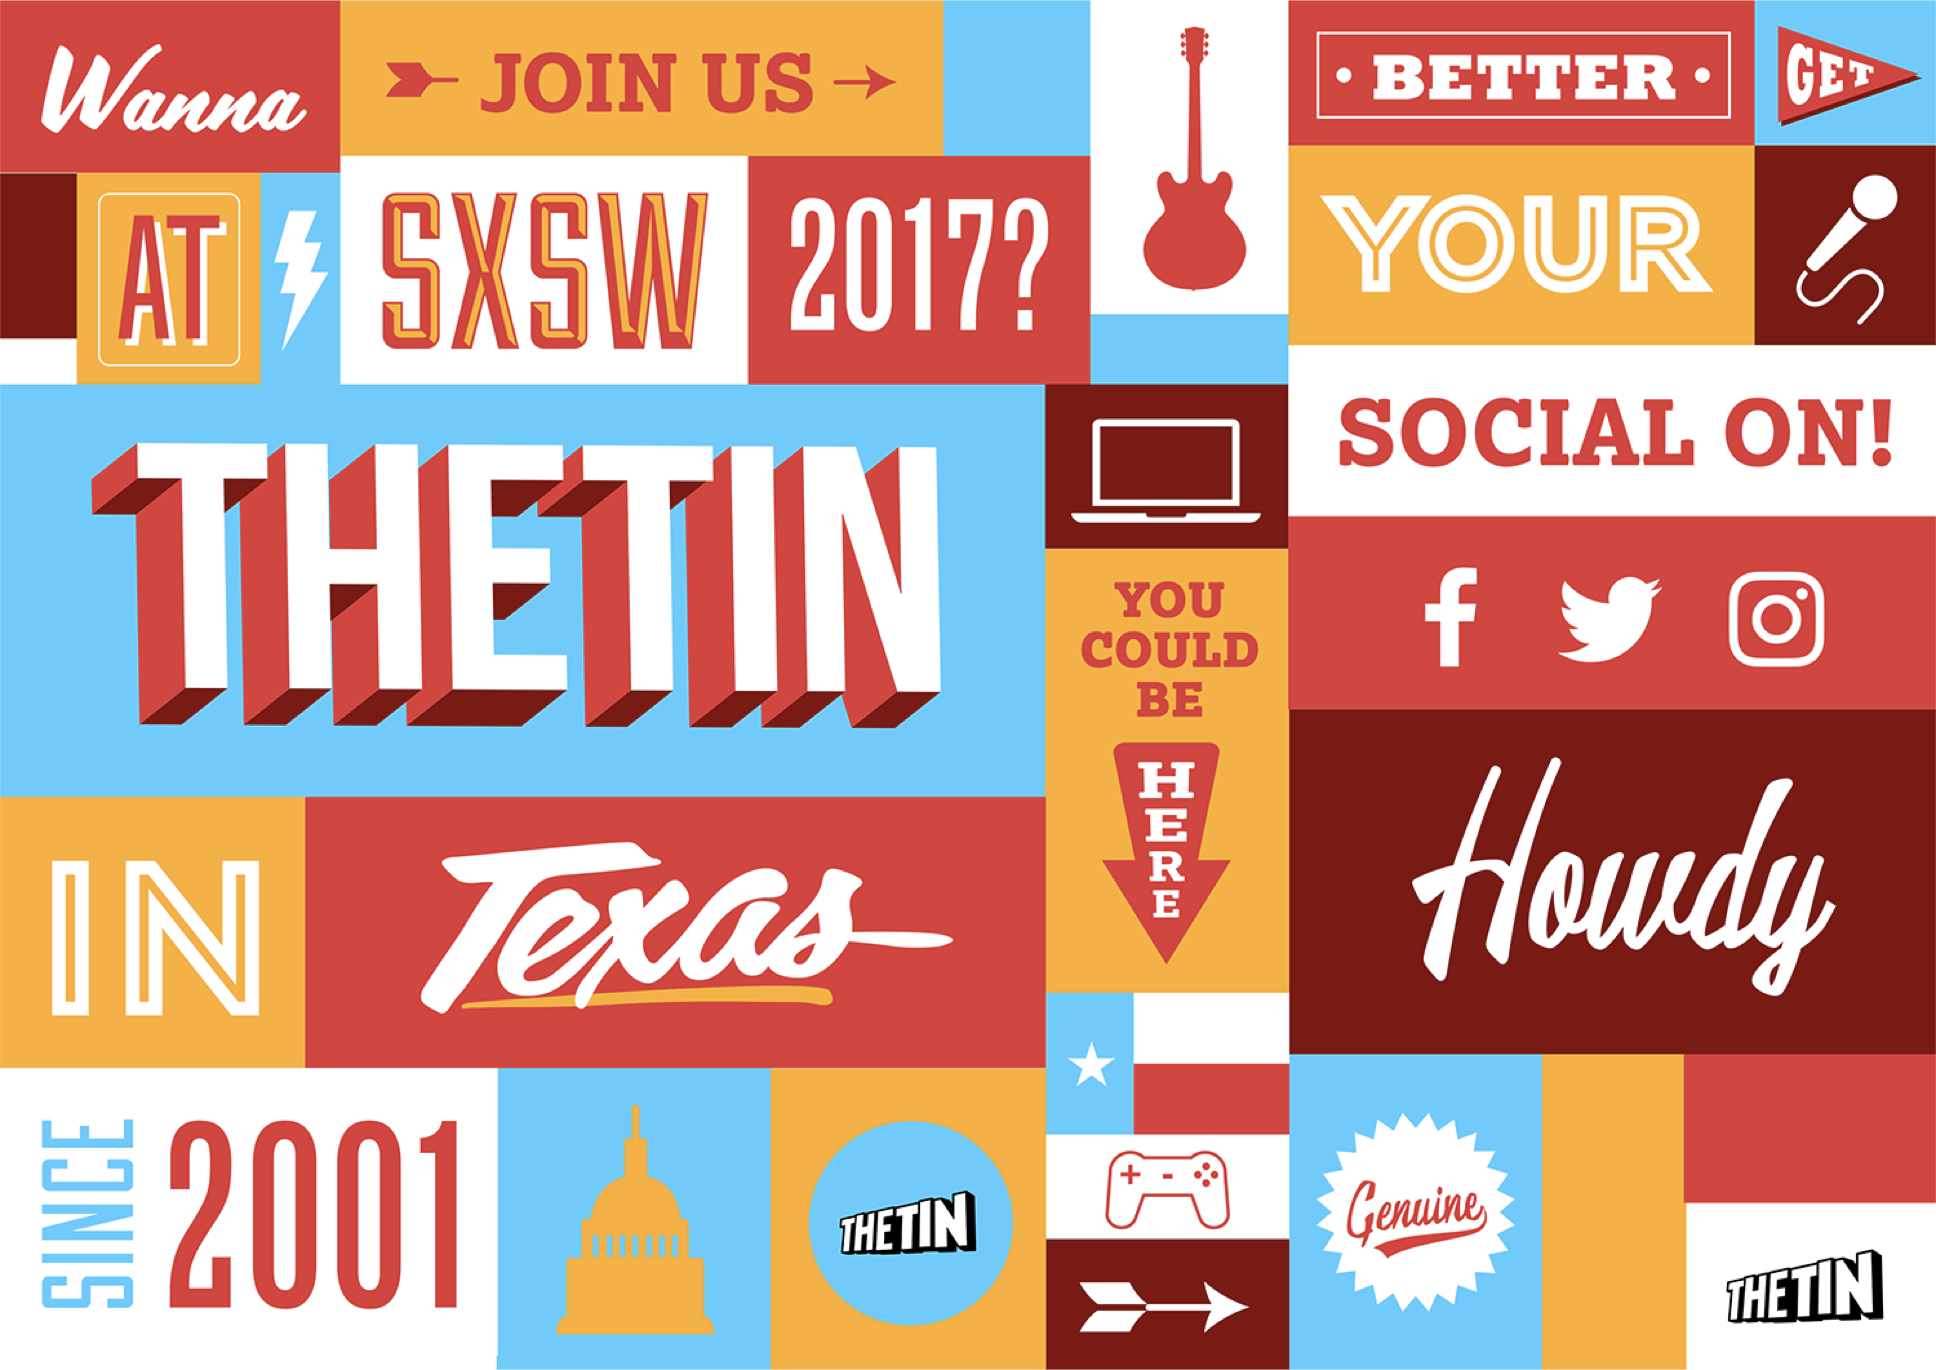 Selling internets and a glimpse of the future at SXSW 2017